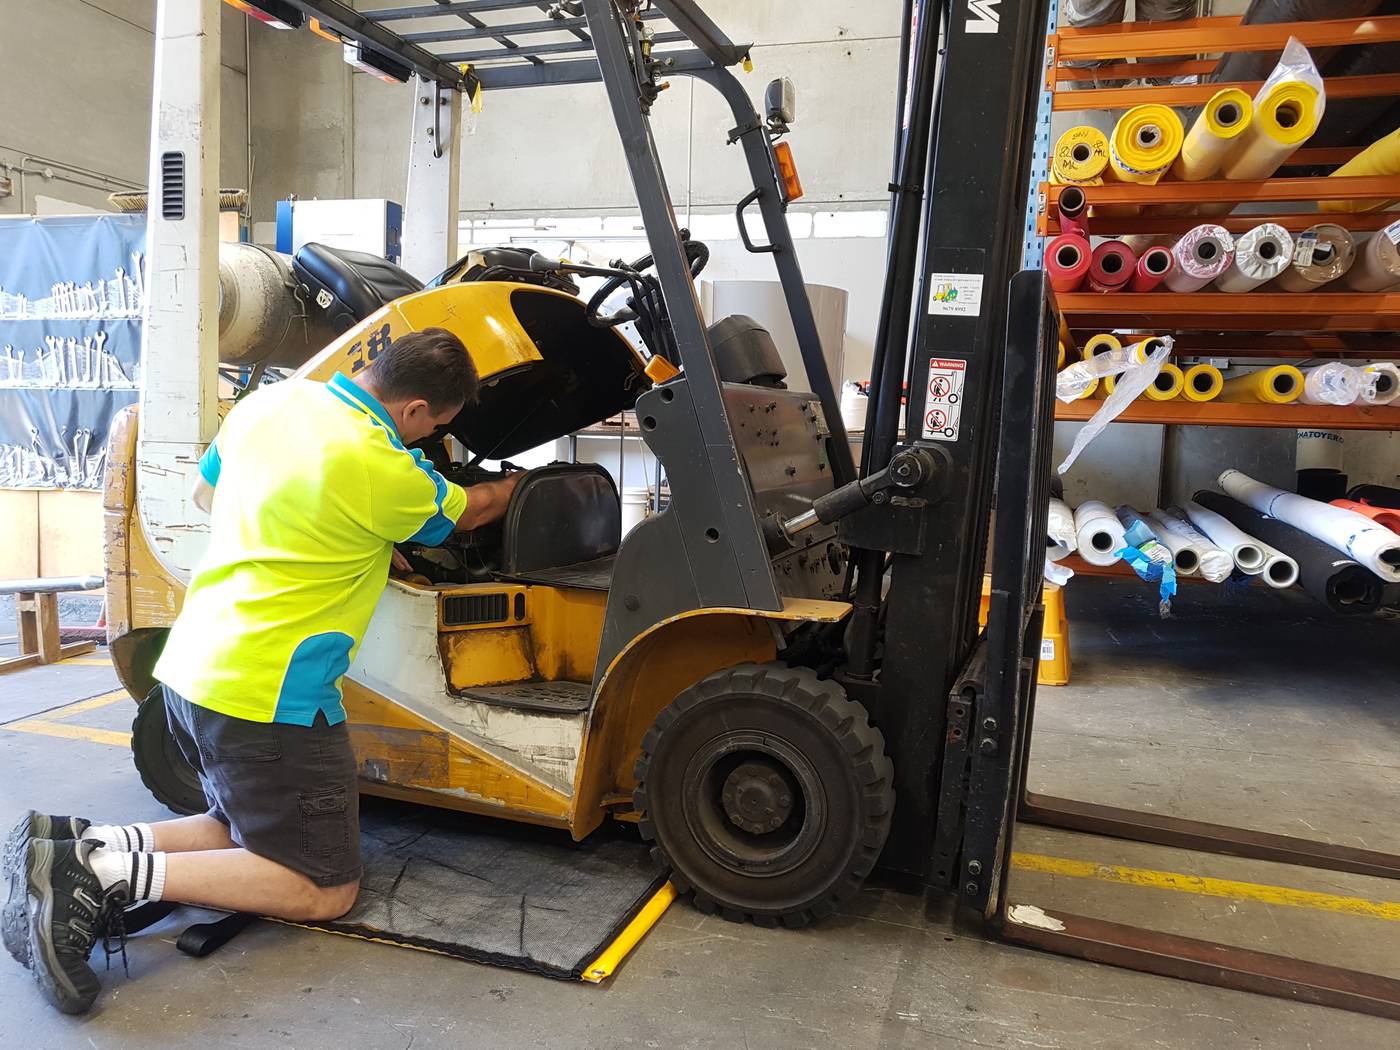 A man is servicing a forklift with an absorbent spill mat under the forklift to catch any leaks